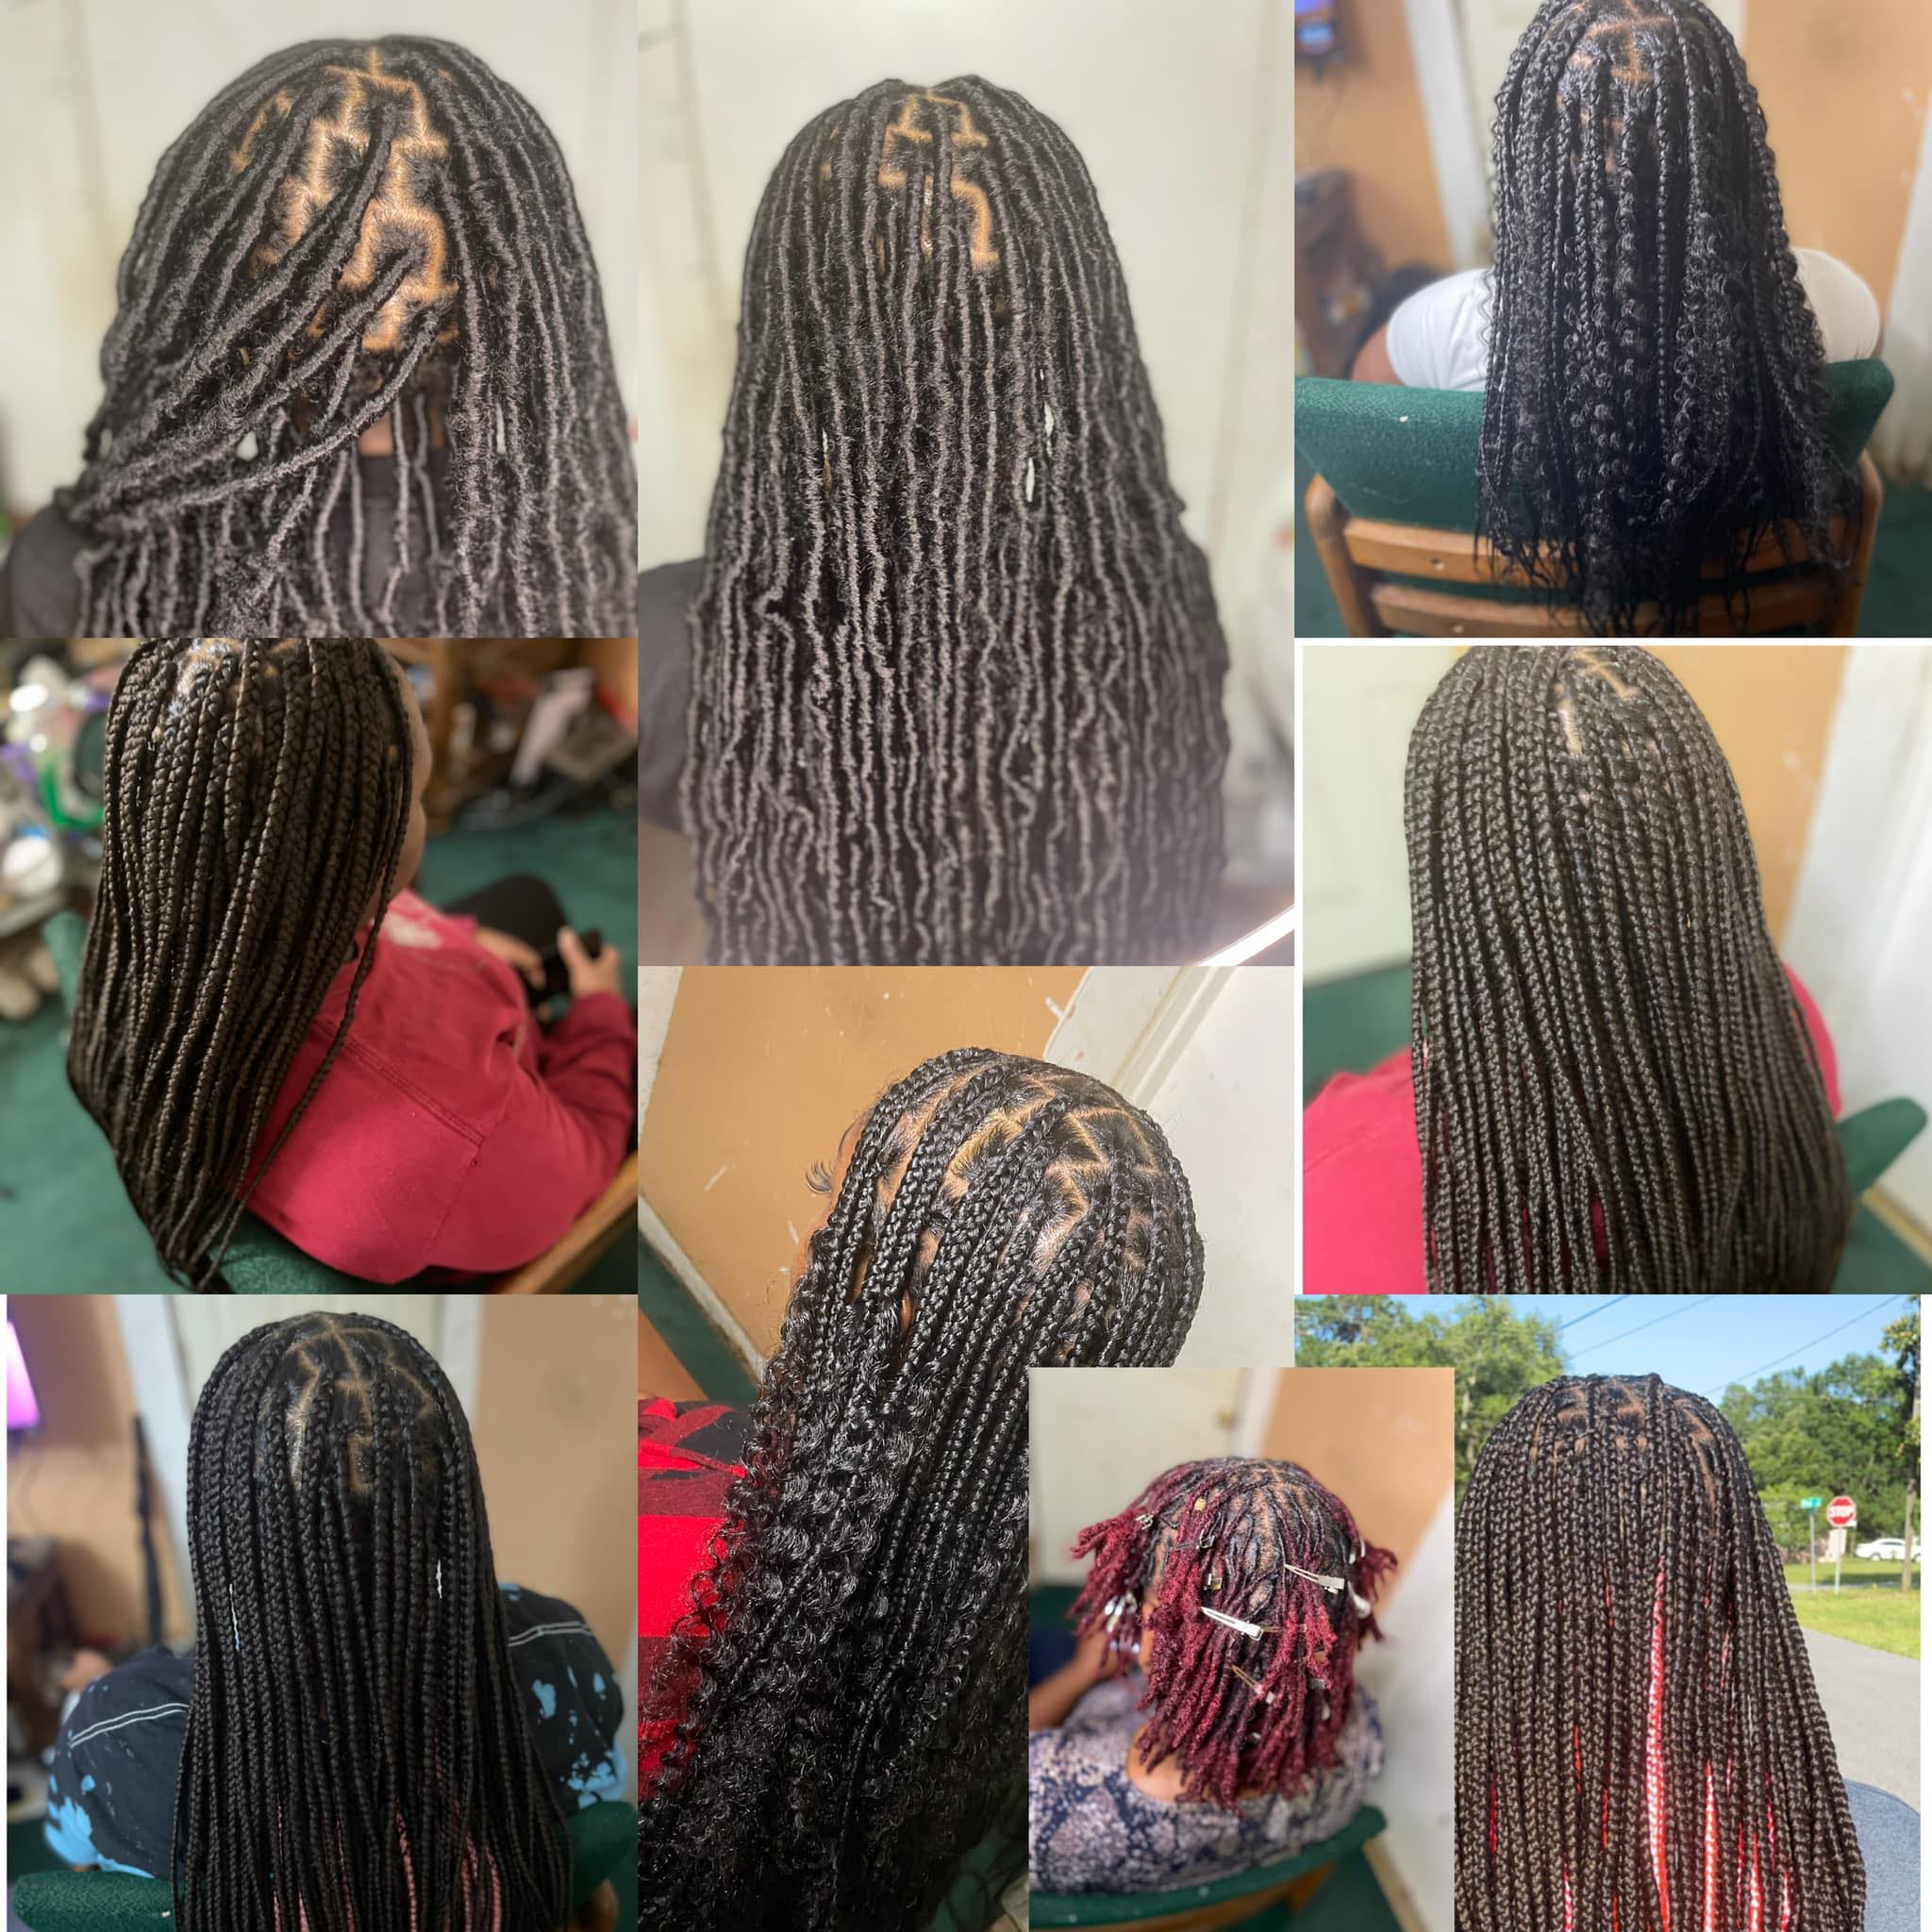 Braided Beauties and More by Chrissy